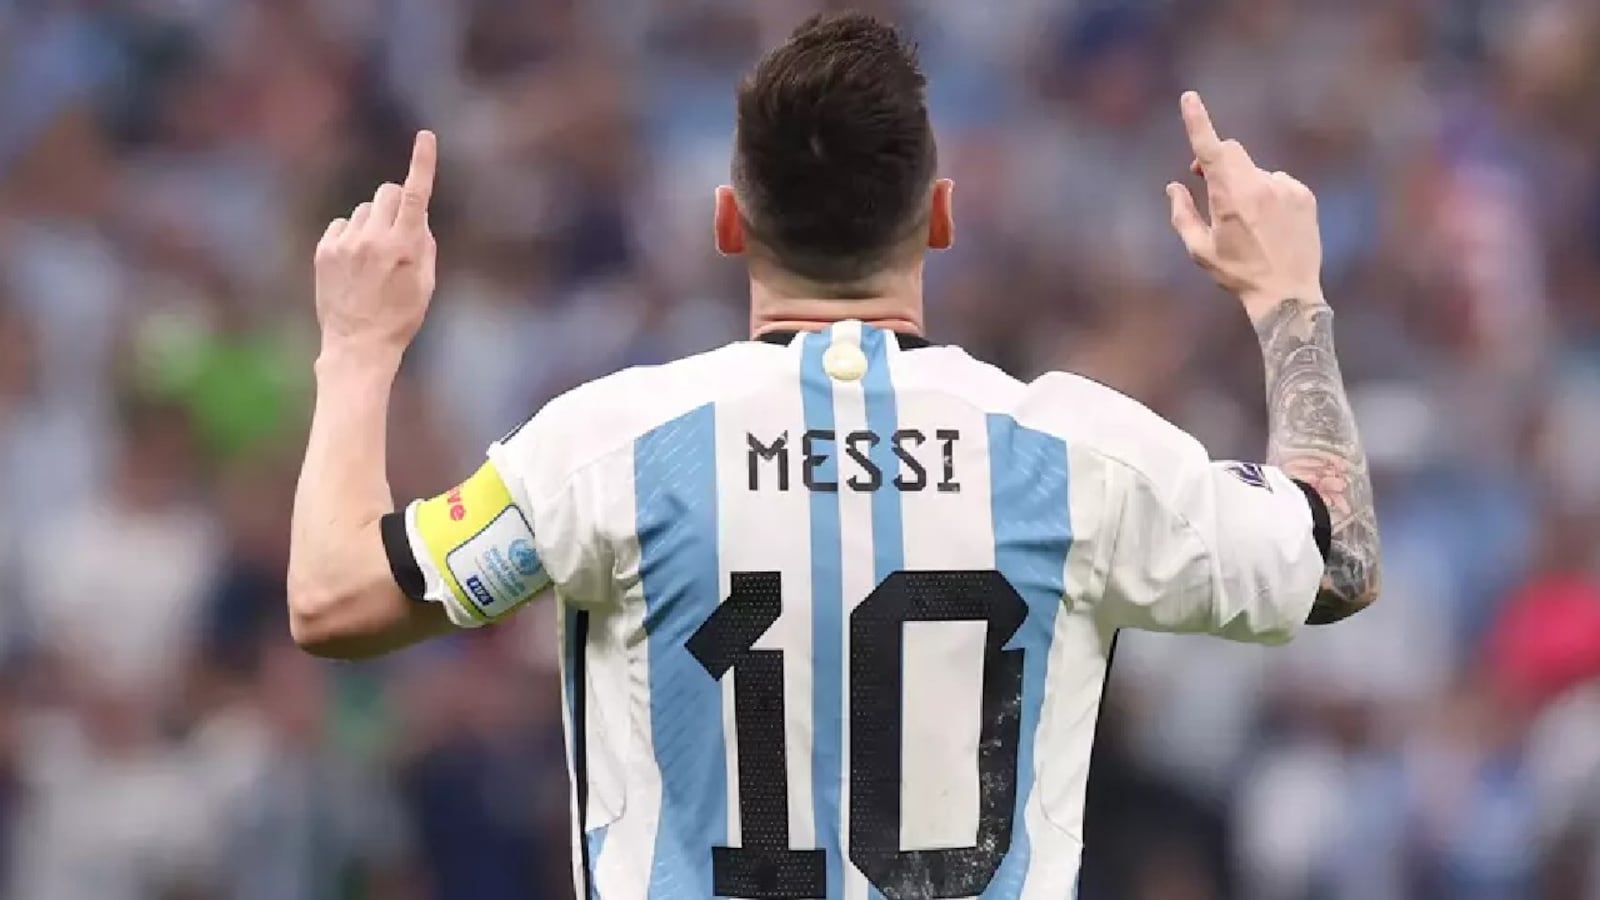 Lionel Messi-inspired Argentina wins World Cup after beating France in  sensational final, Nation & World News